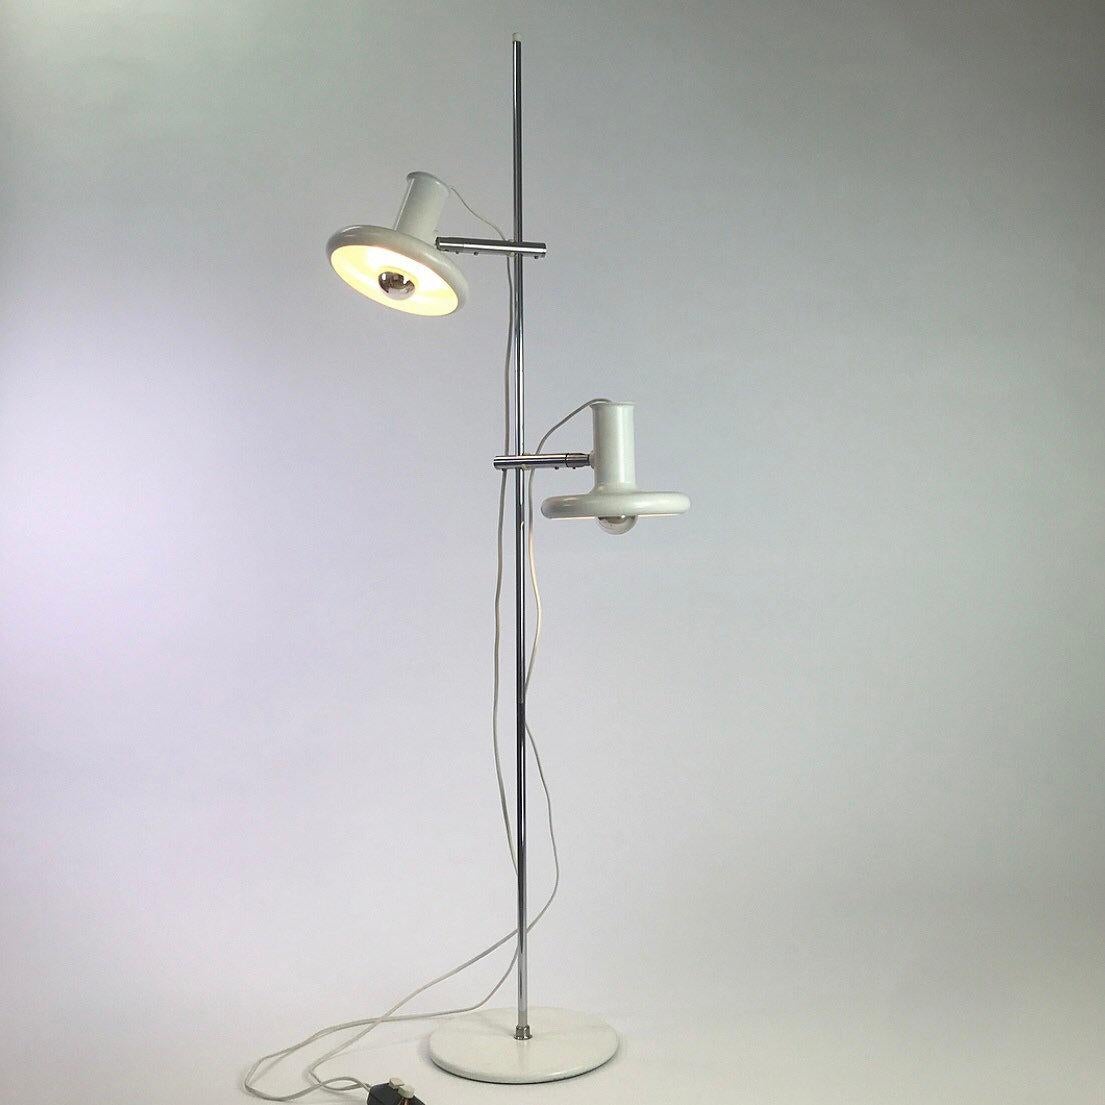 Metal Classic Danish Floor Lamp from the 1970s by Hans Due for Fog & Mørup